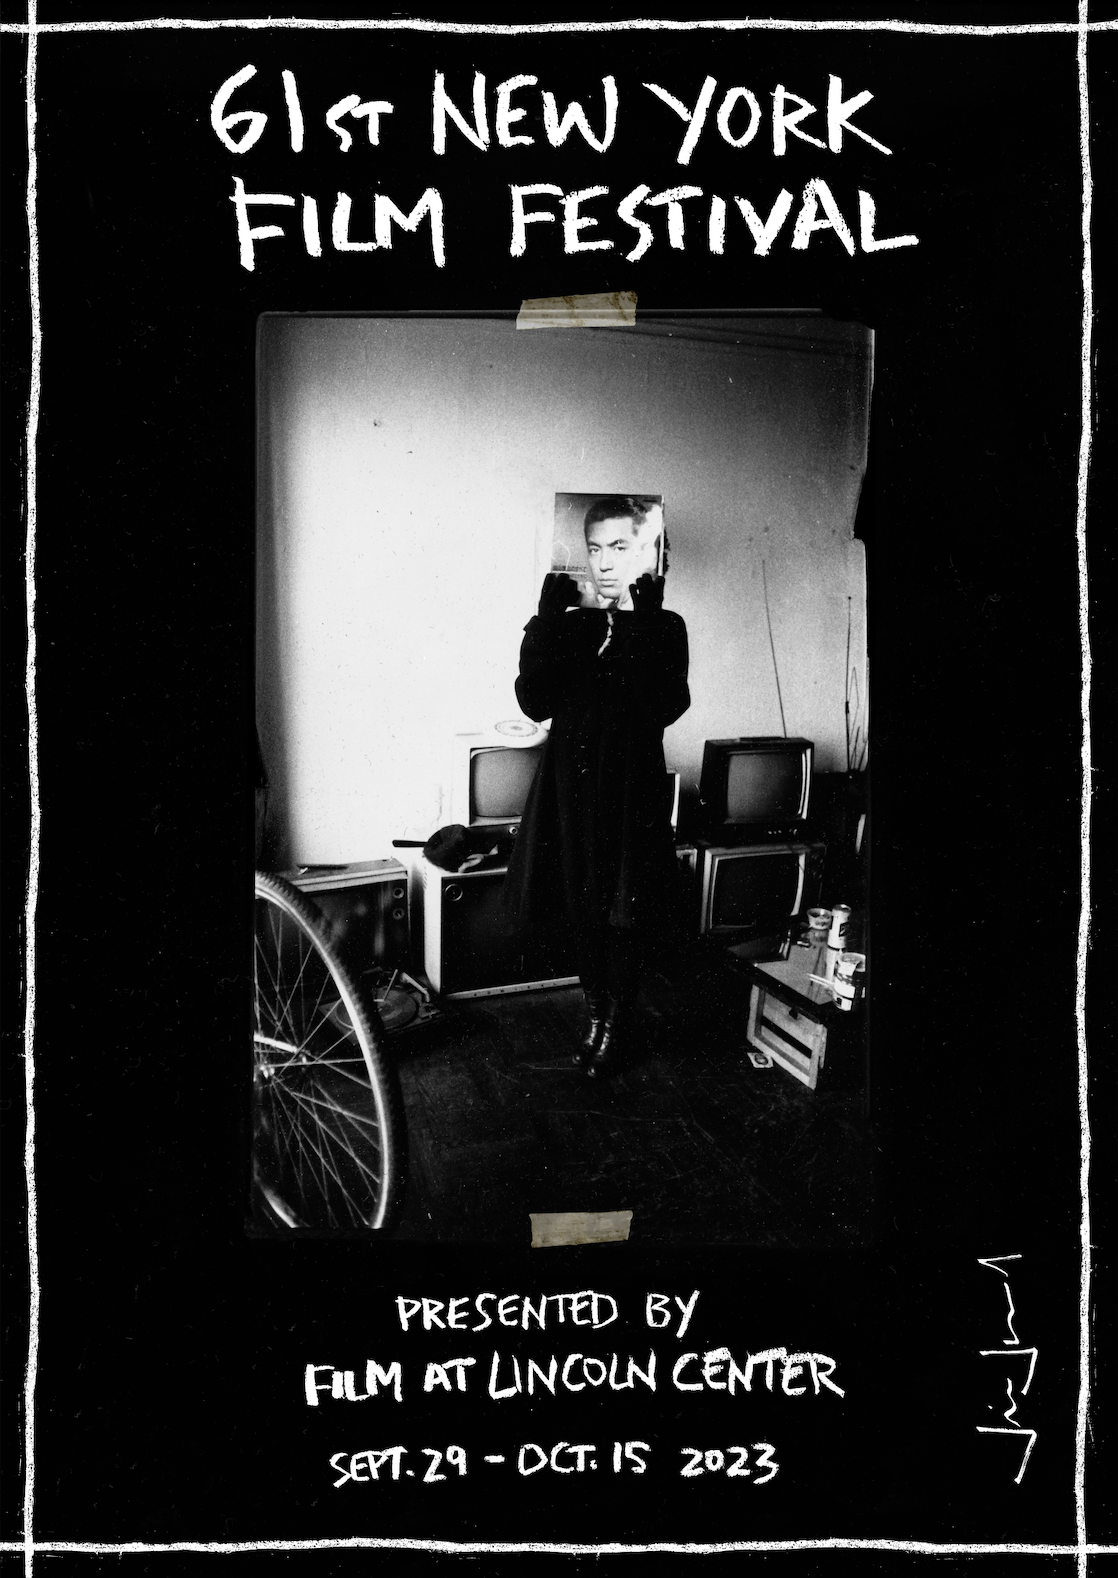 61st New York Film Festival Poster by Jim Jarmusch Unveiled